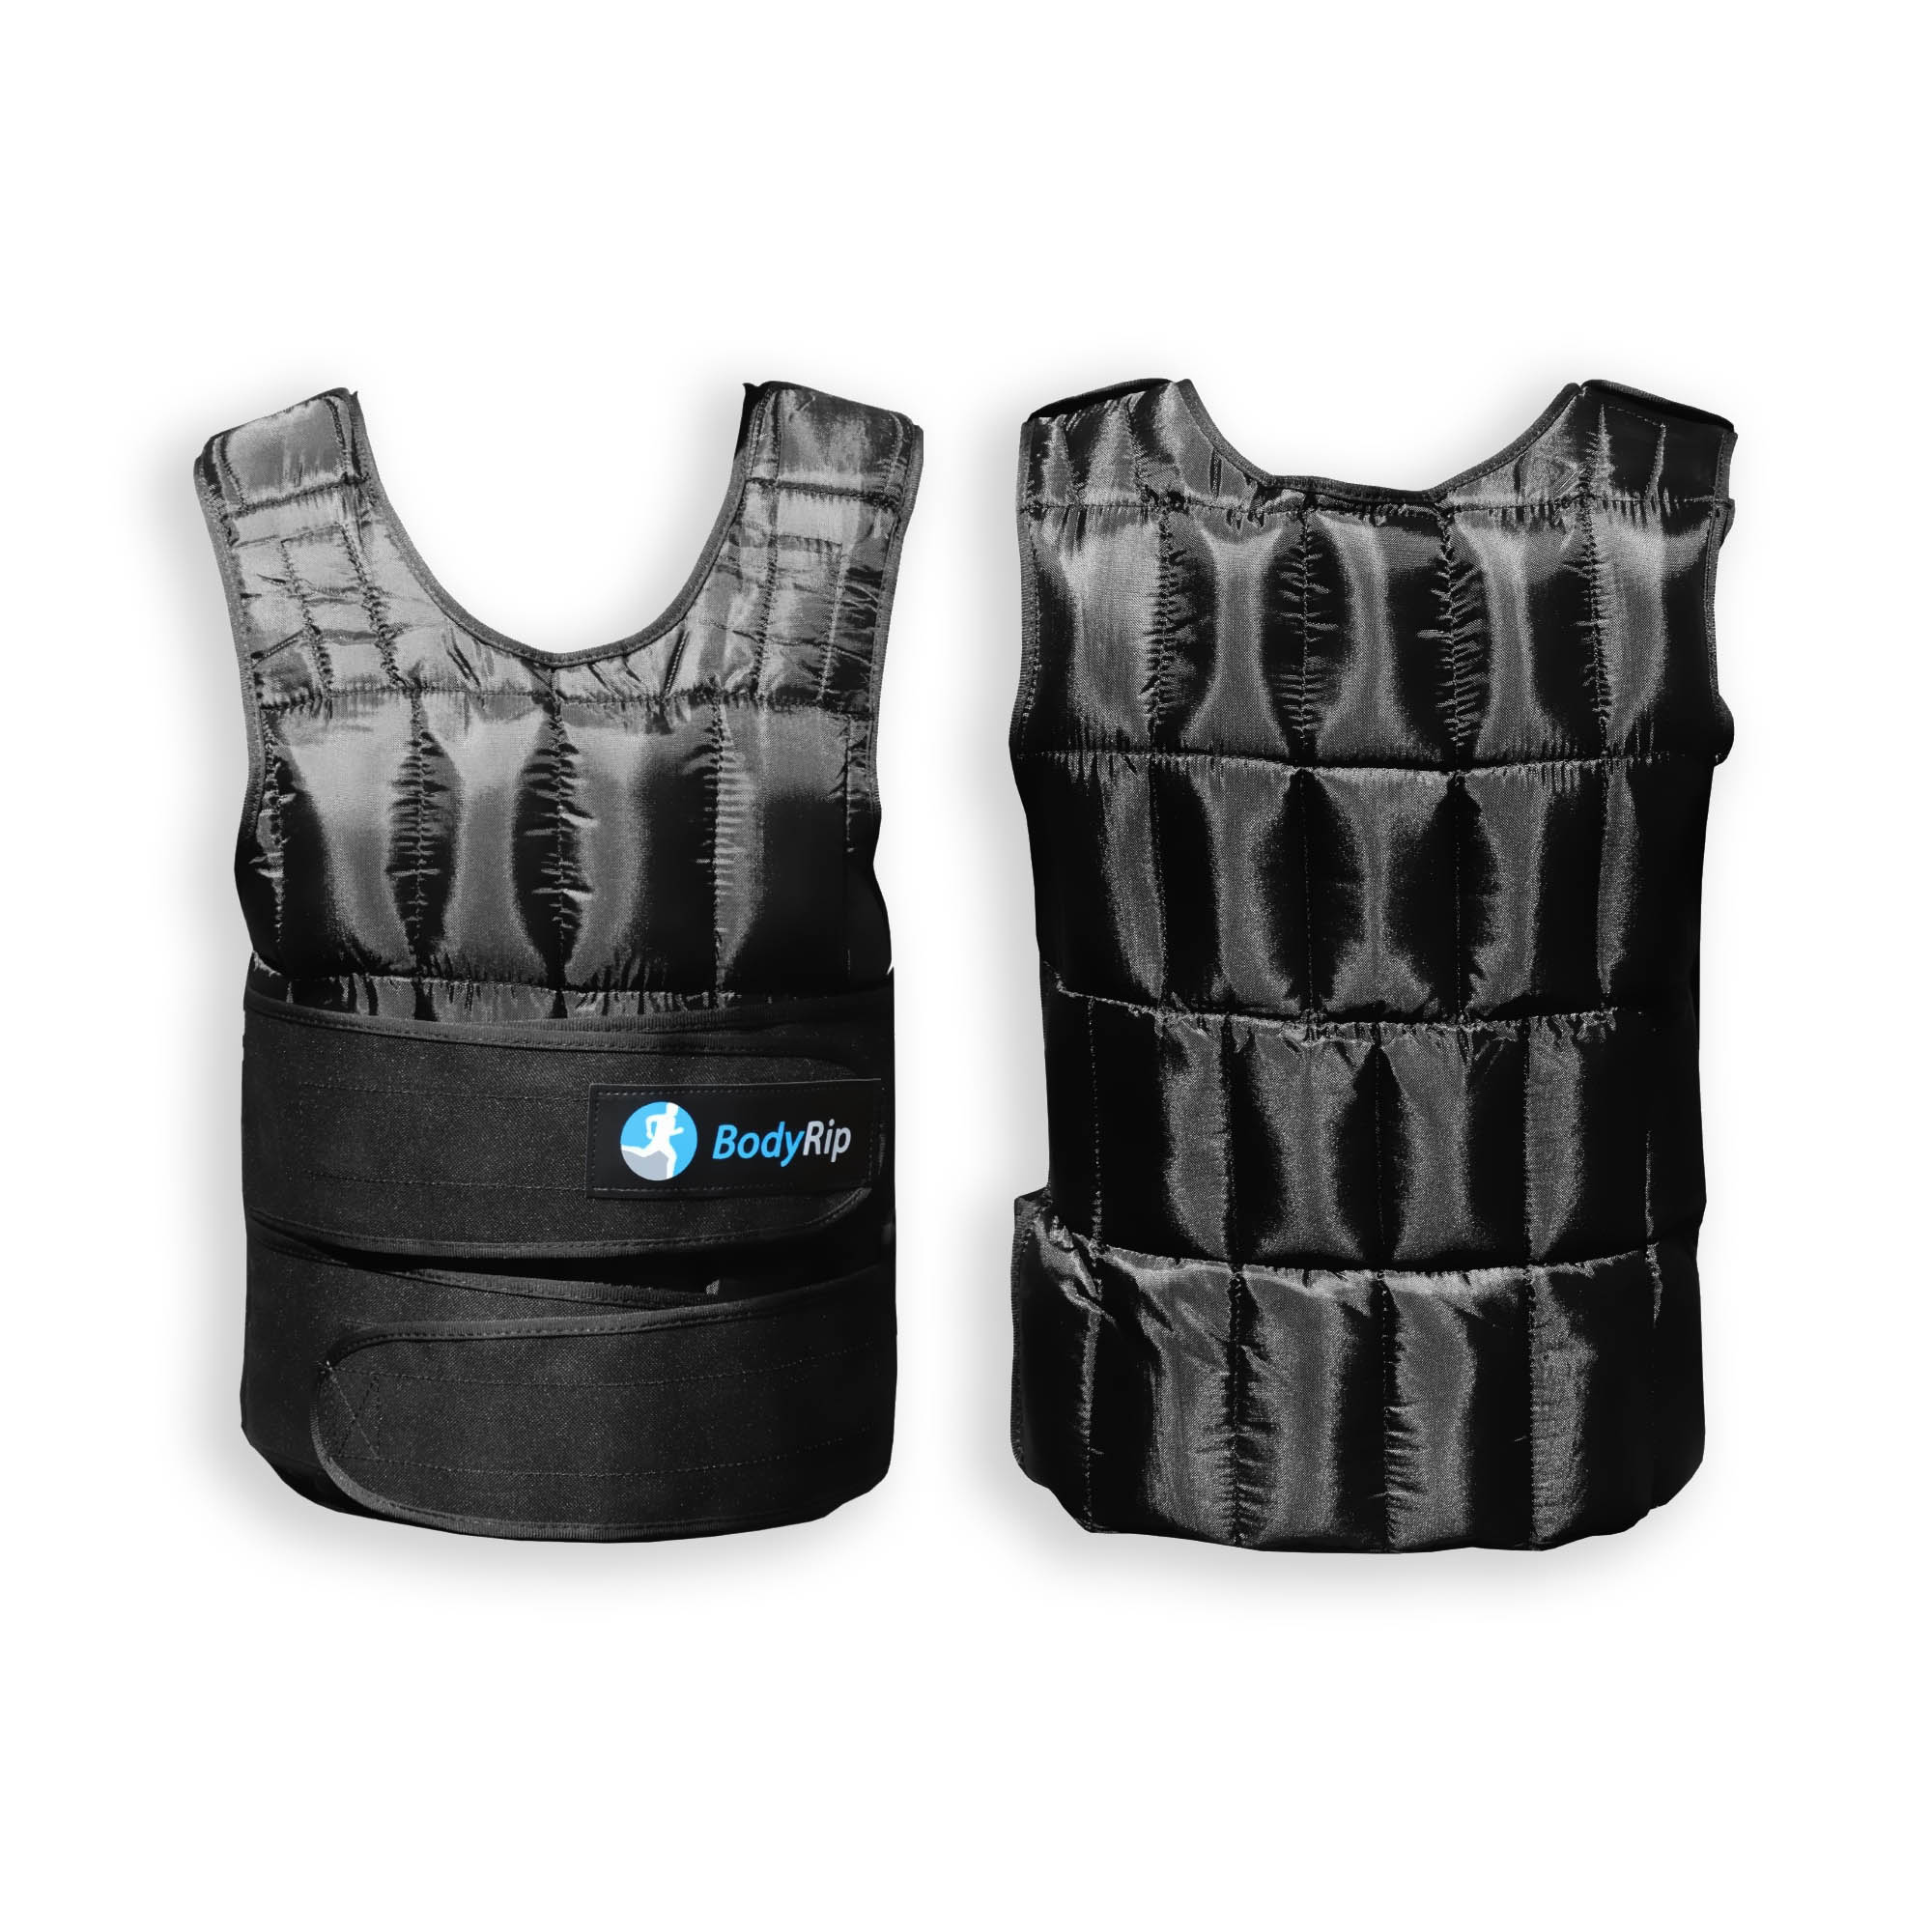 Xn8 Sports Weighted Vest 5,10,15,20Kg Weight Loss Training Running Adjustable Jacket Removable Weight Crossfit Weight Loss Body Workout Exercise